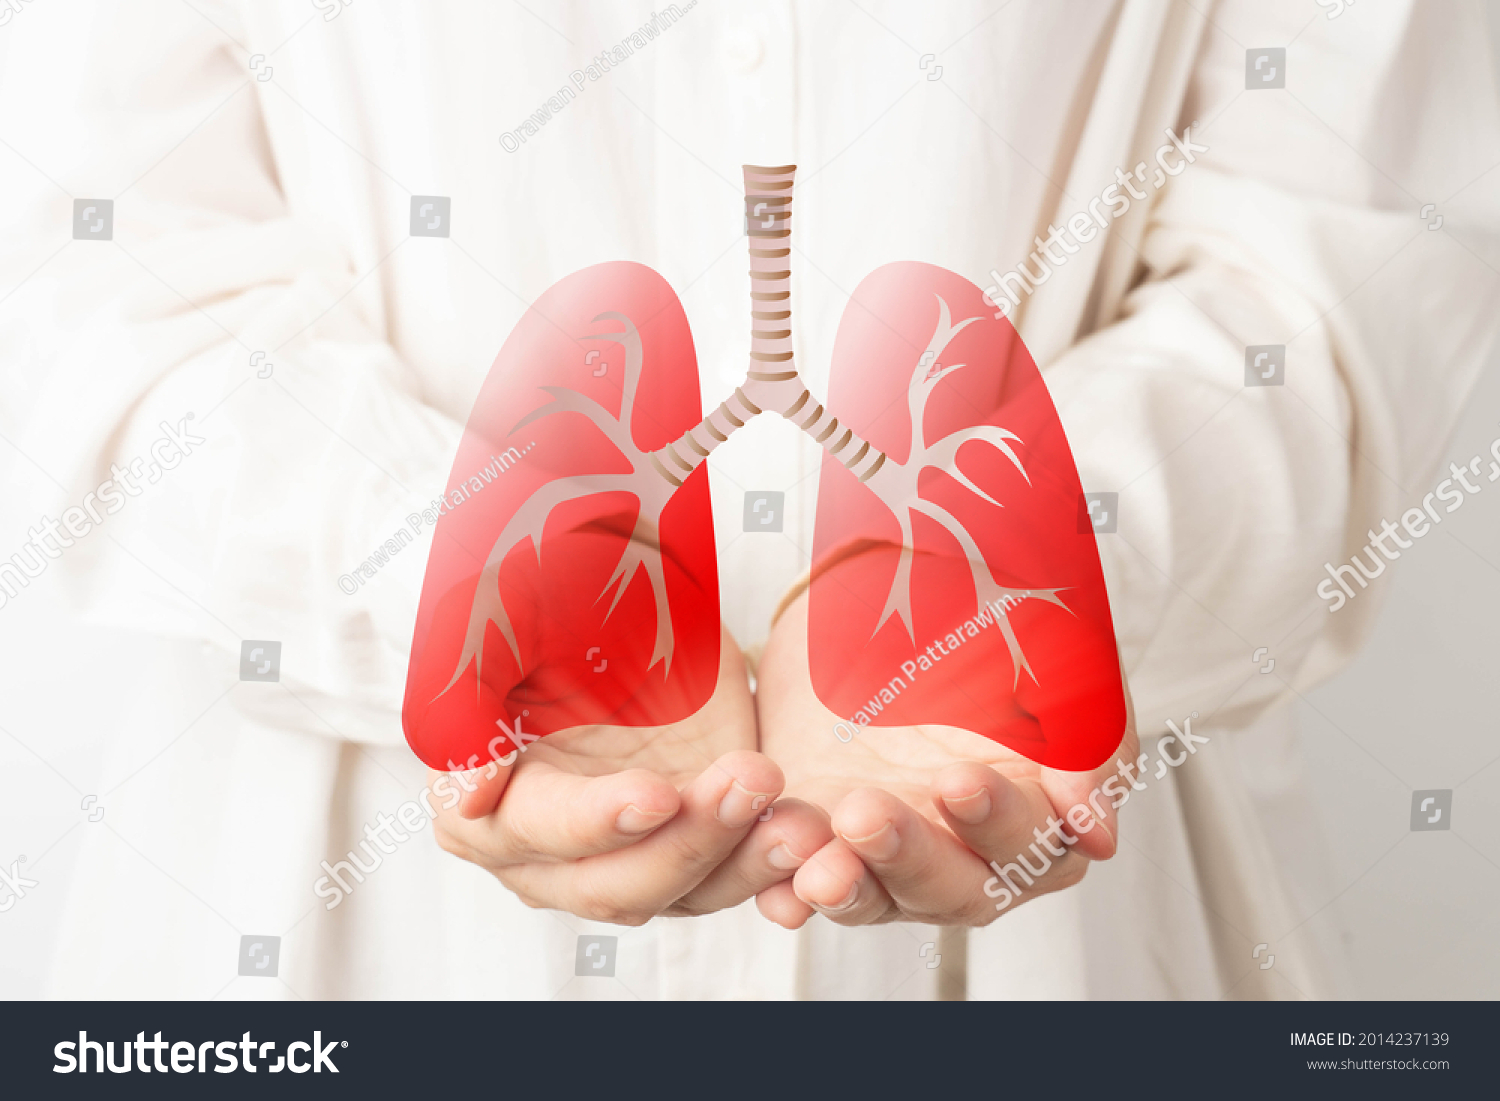 Human hands holding lung organ symbol. Awareness of lung cancer, pneumonia, asthma, COPD, pulmonary hypertension, world no tobacco day and eco air pollution. Respiratory and chest concept. #2014237139